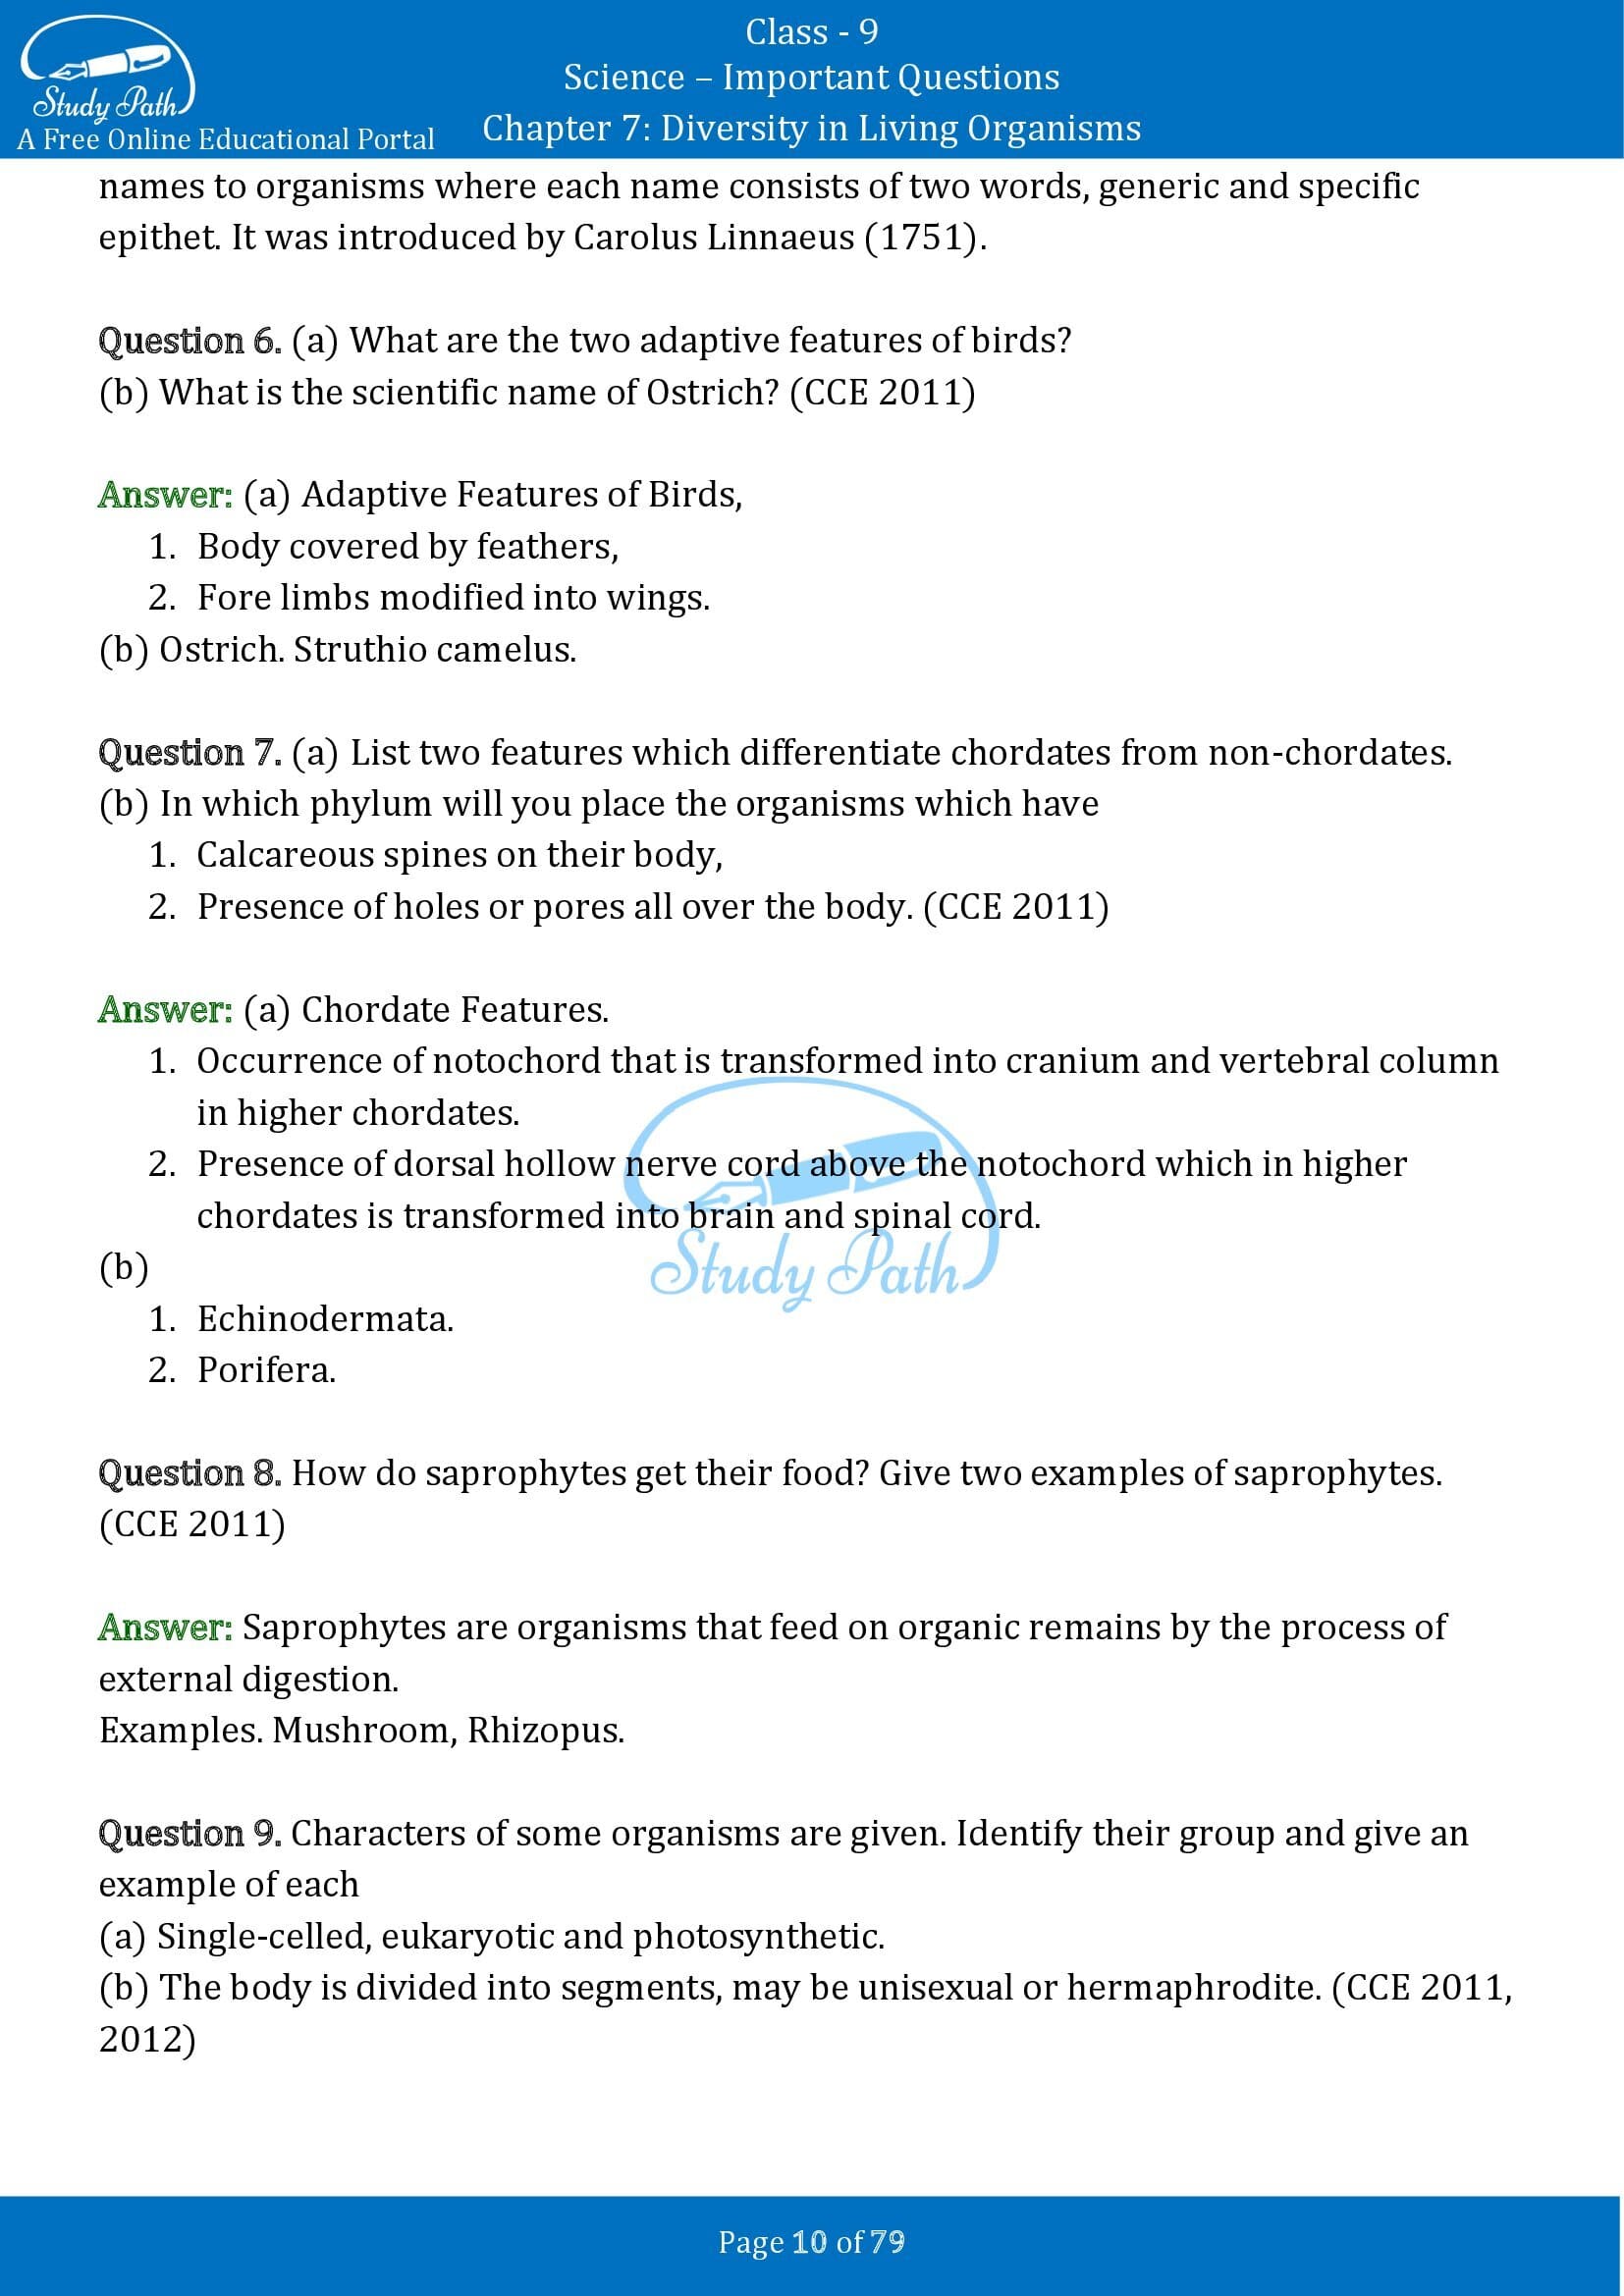 Important Questions for Class 9 Science Chapter 7 Diversity in Living Organisms 00010